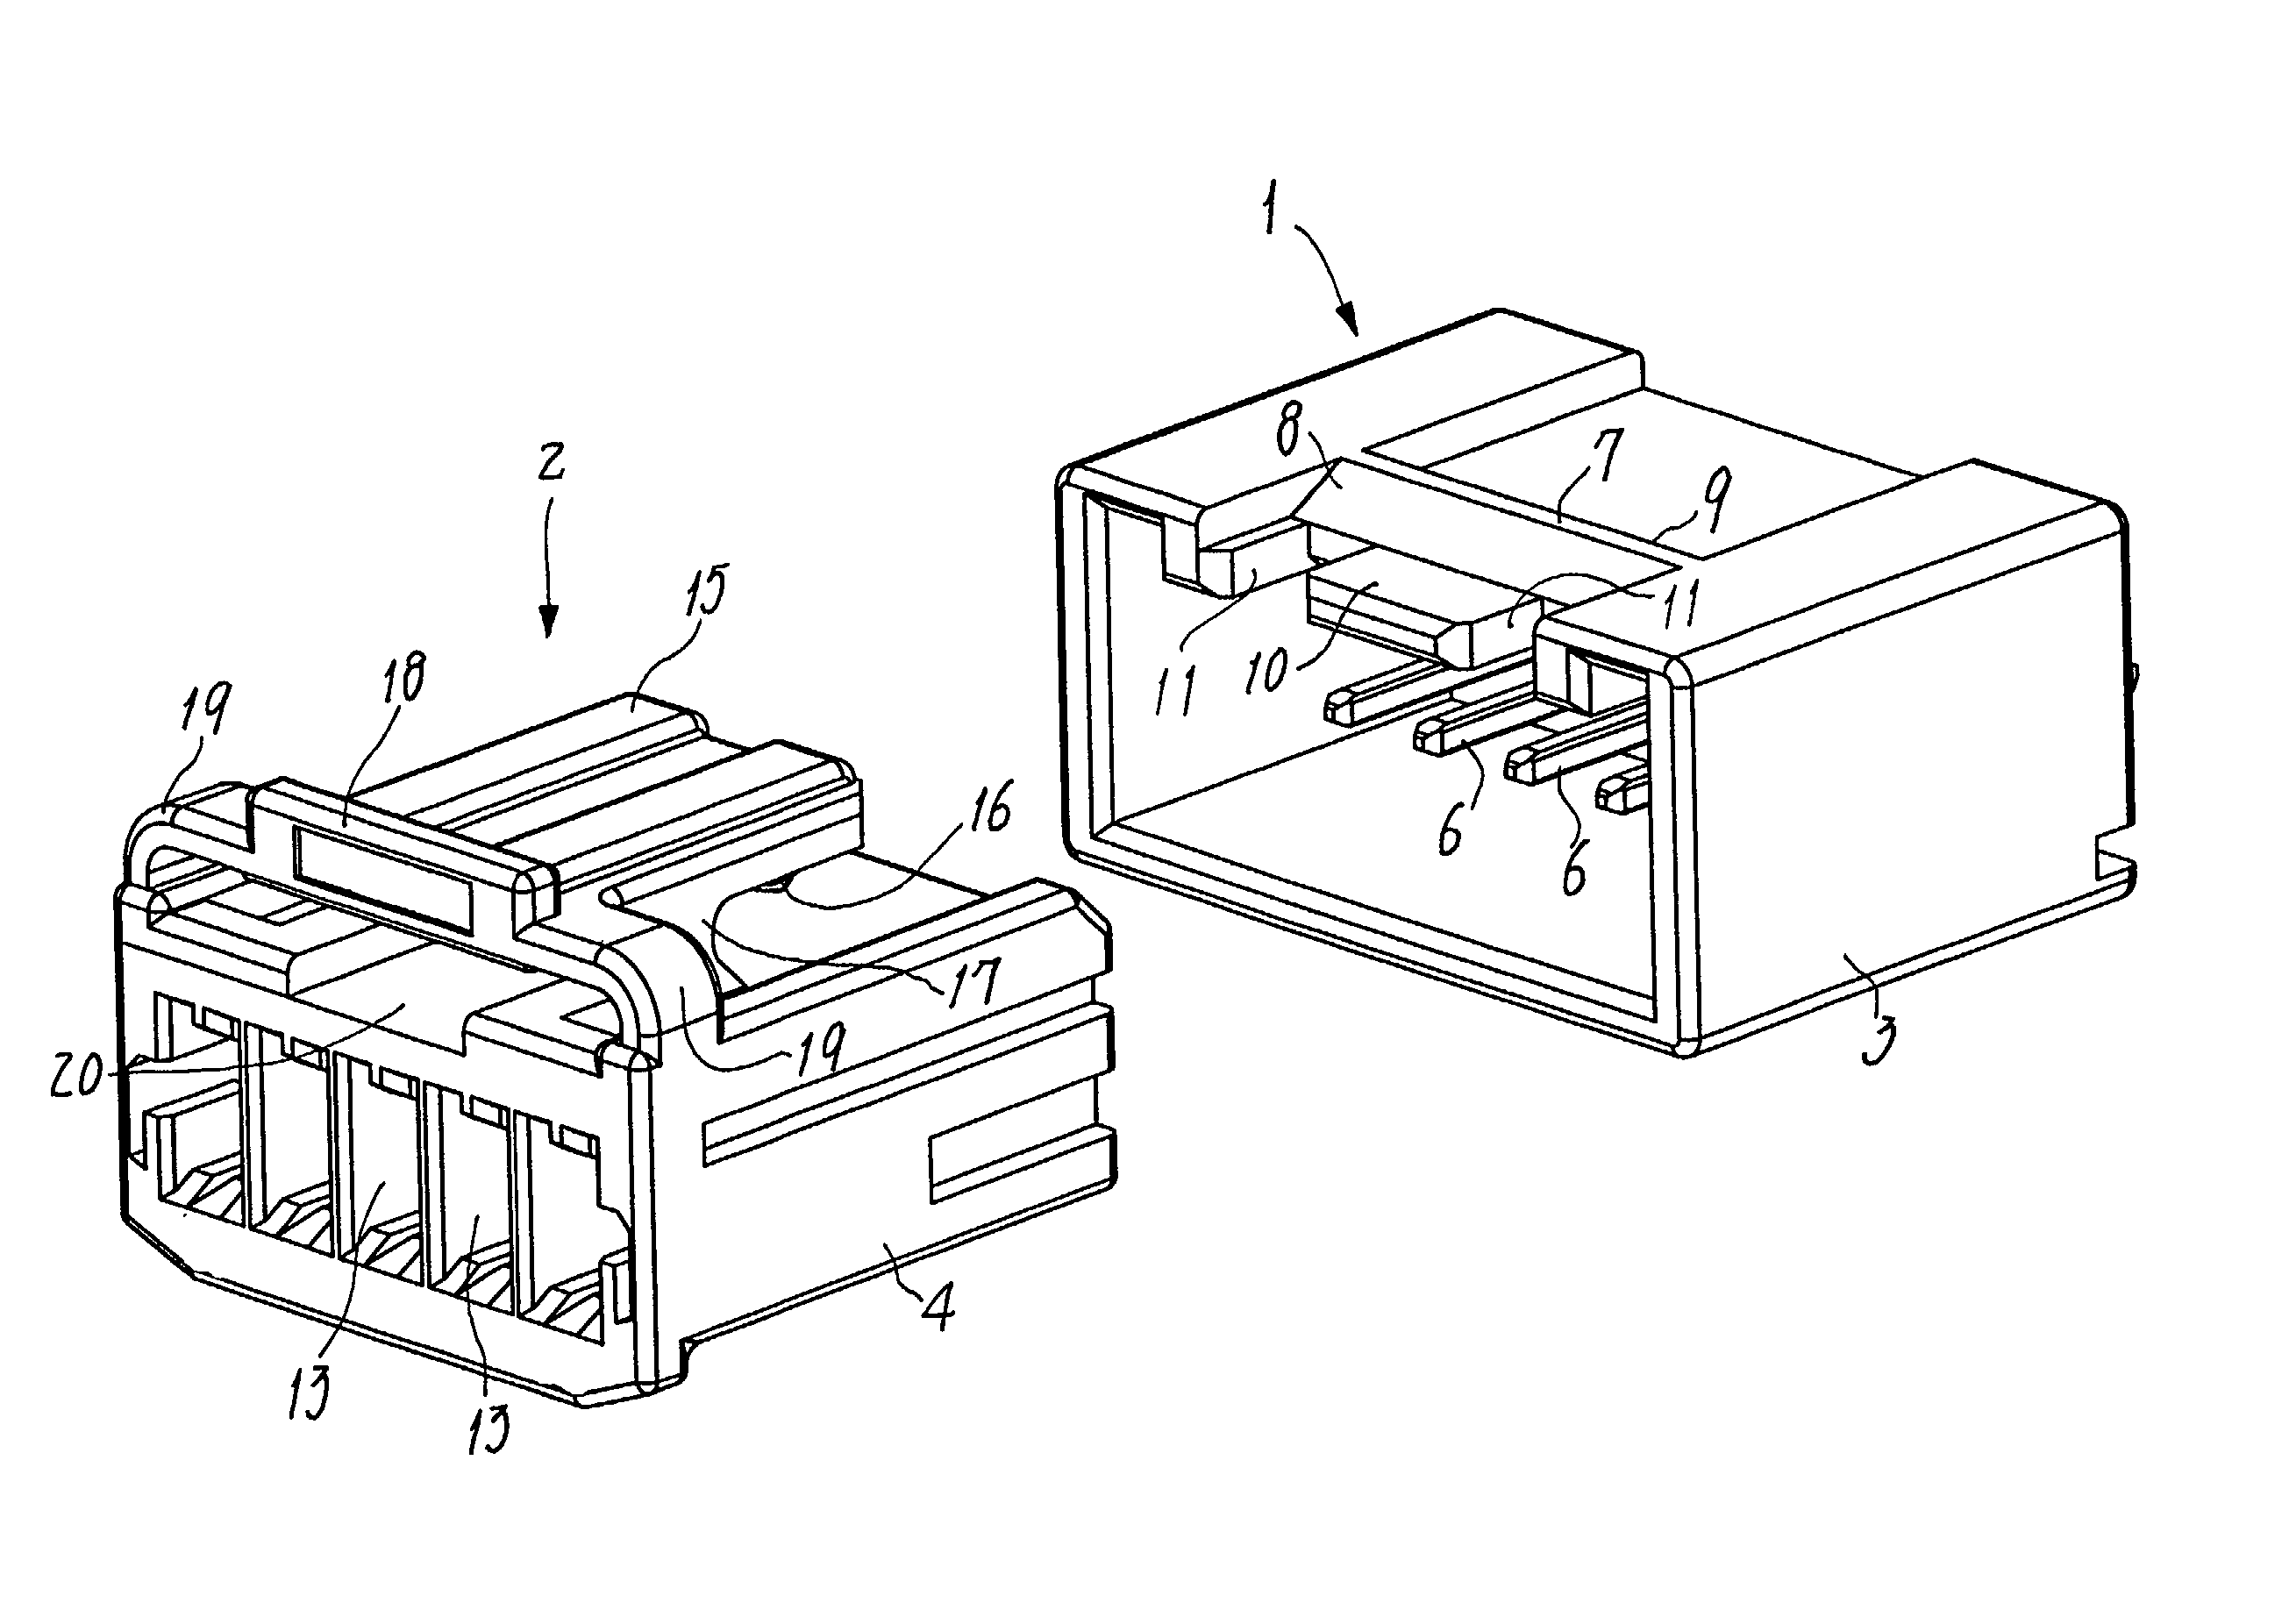 Connector assembly having an interlocking system